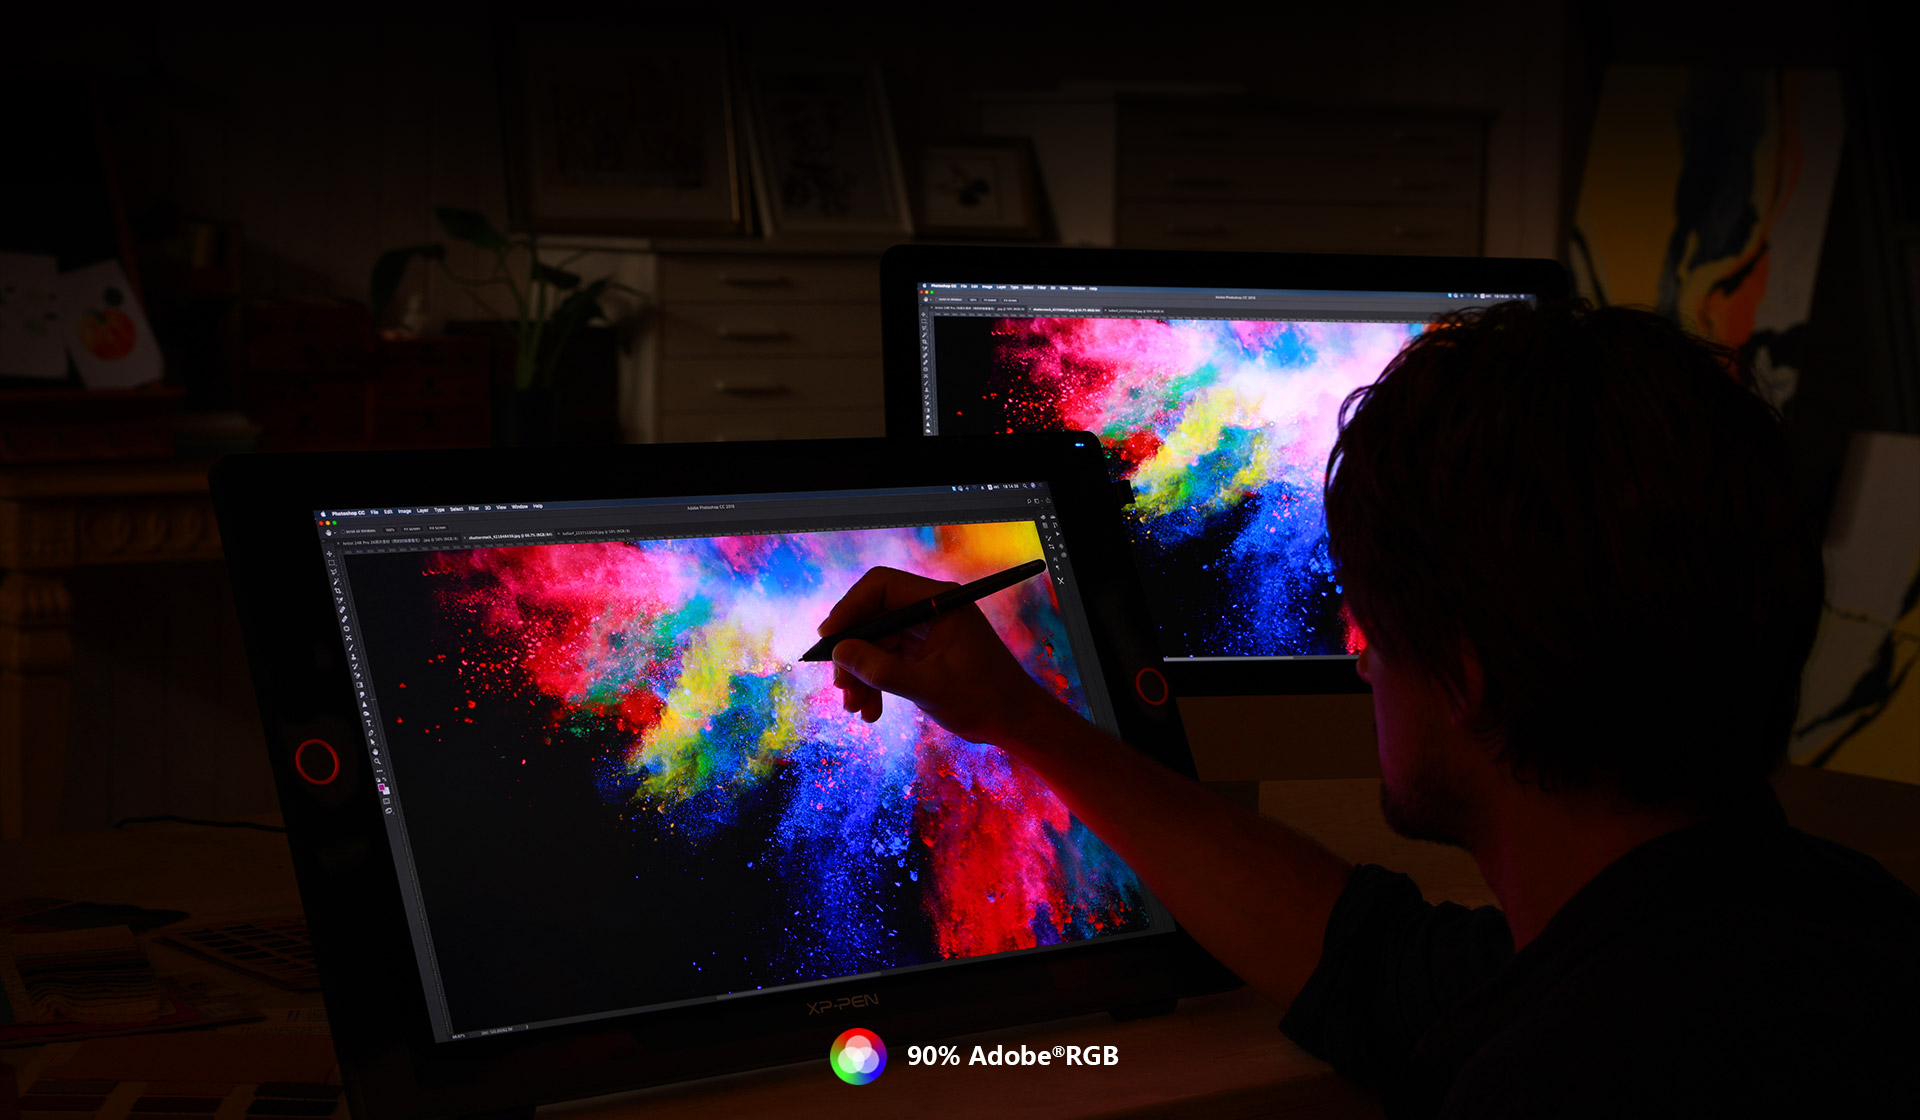 Fuel your creativity with XP-Pen Artist 24 Pro Graphic Pen Display